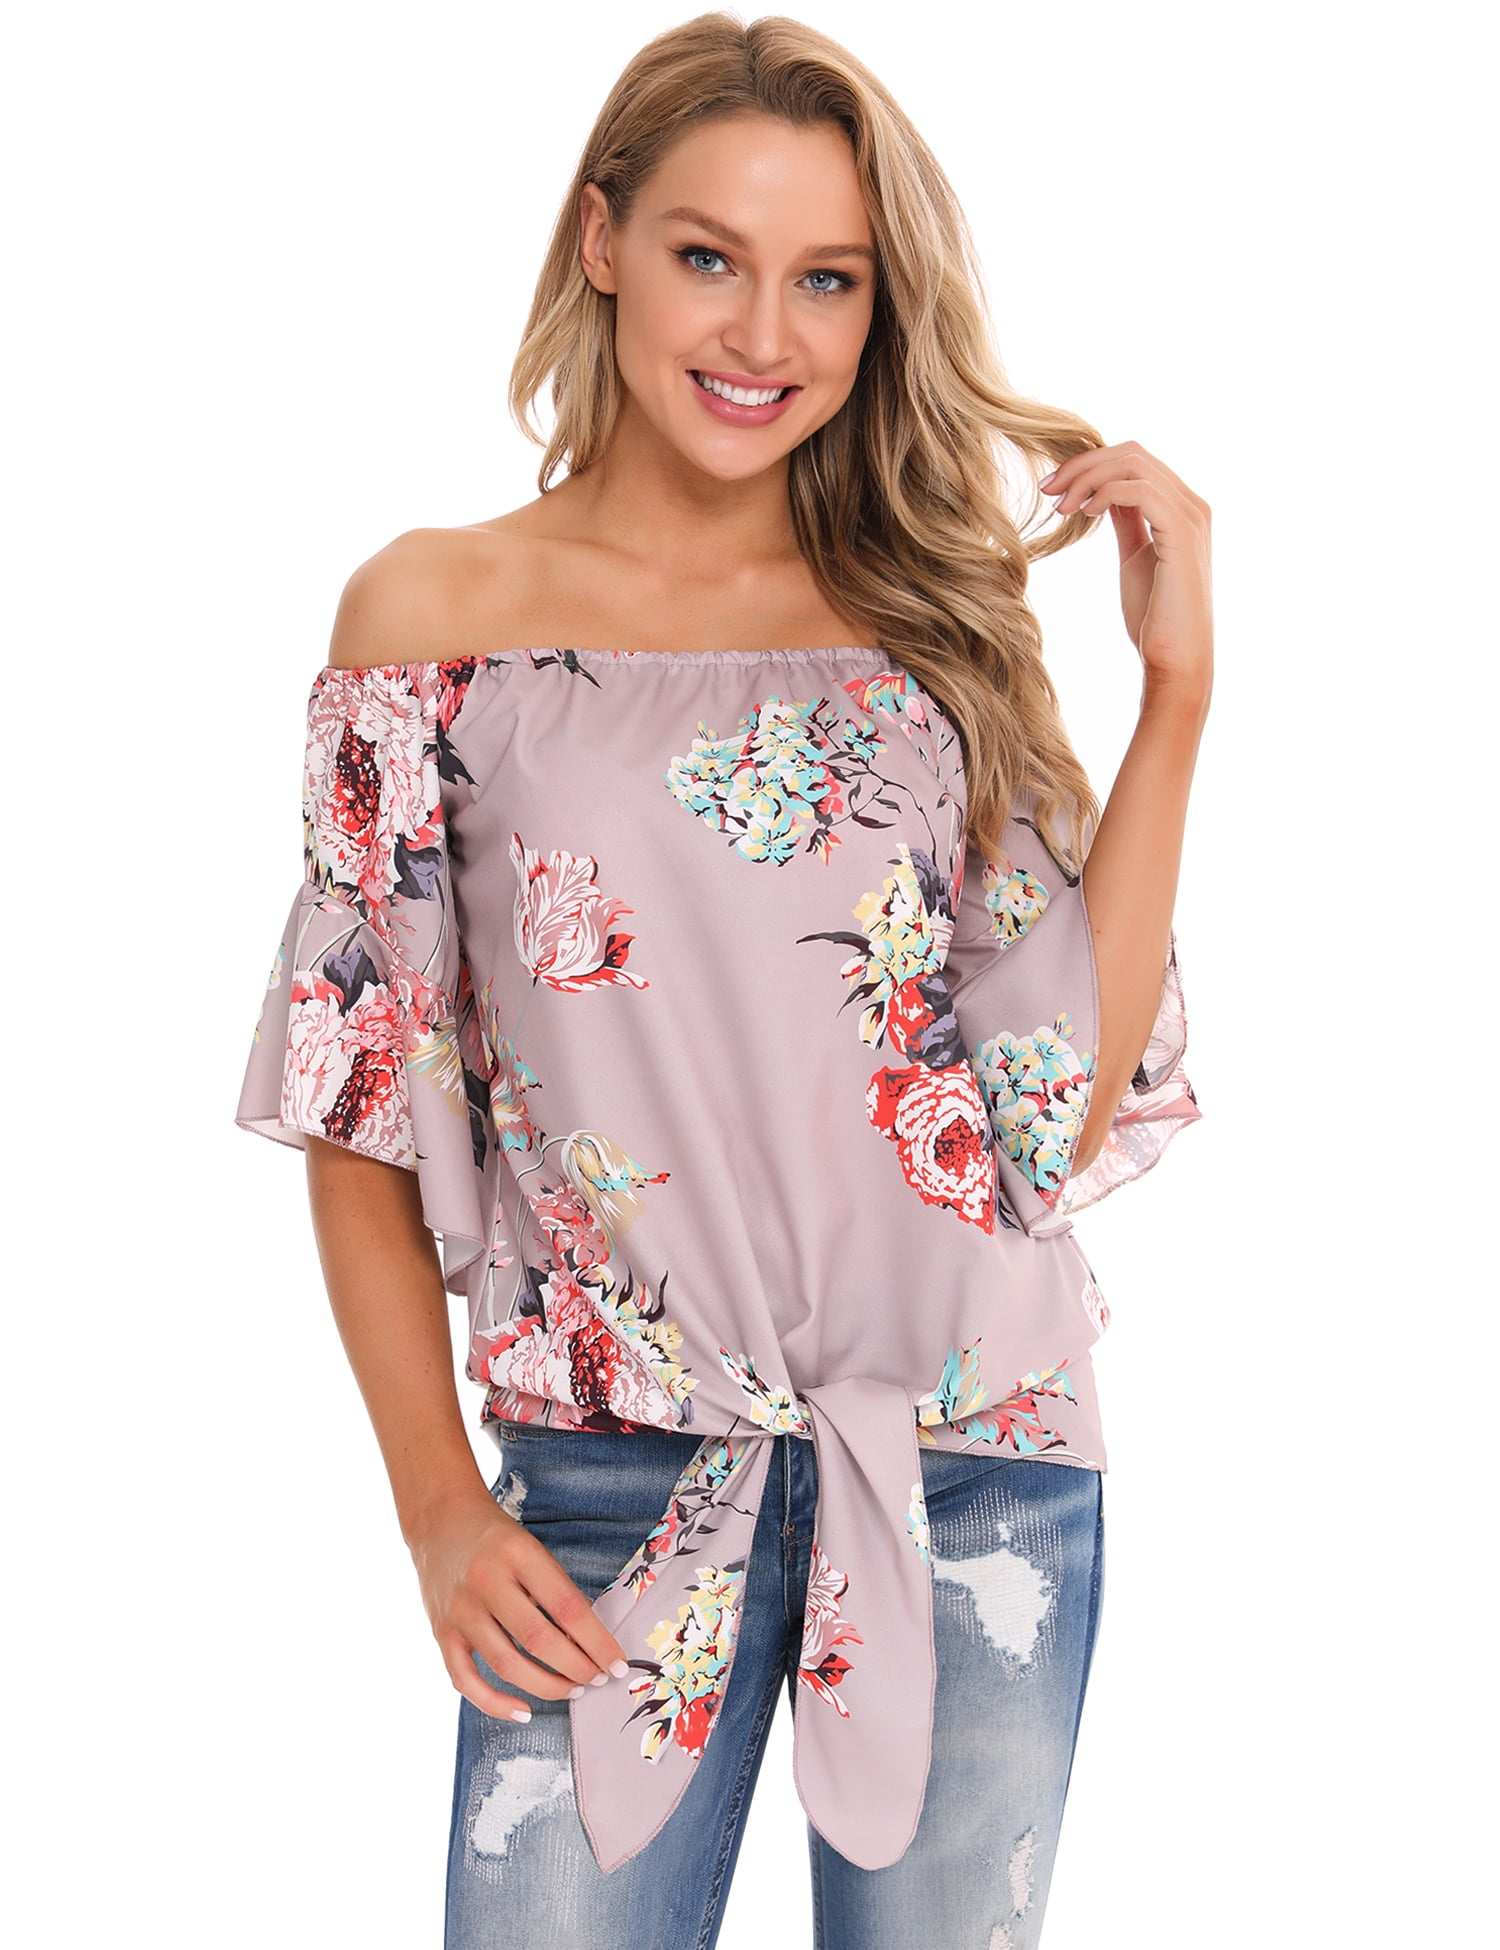 Uniexcosm Women Tops Off Shoulder Floral Print Long Sleeve Shirts ...